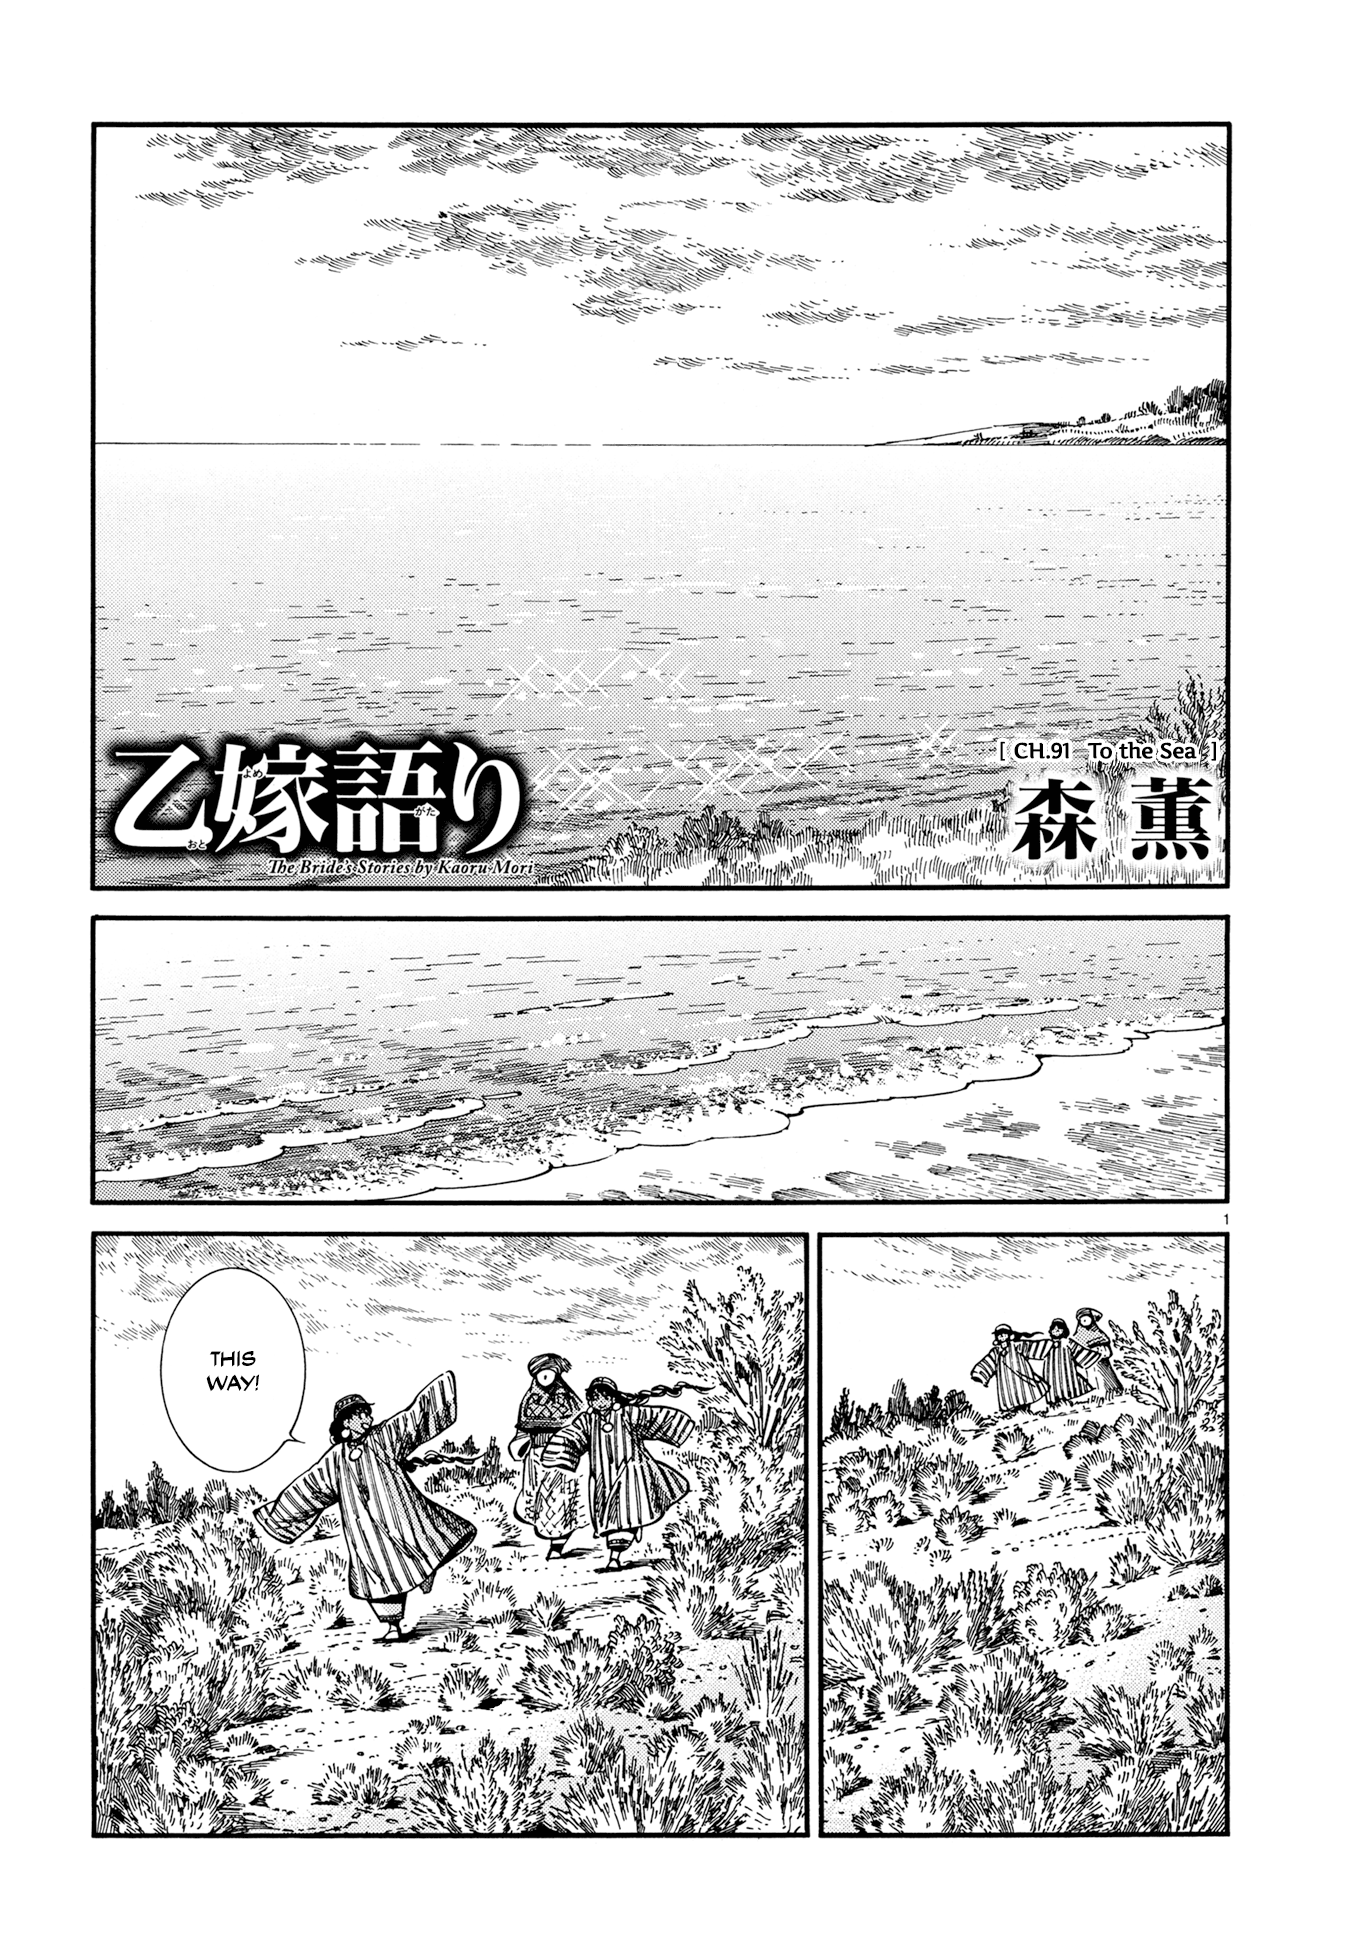 Otoyomegatari Chapter 91: To The Sea - Picture 1